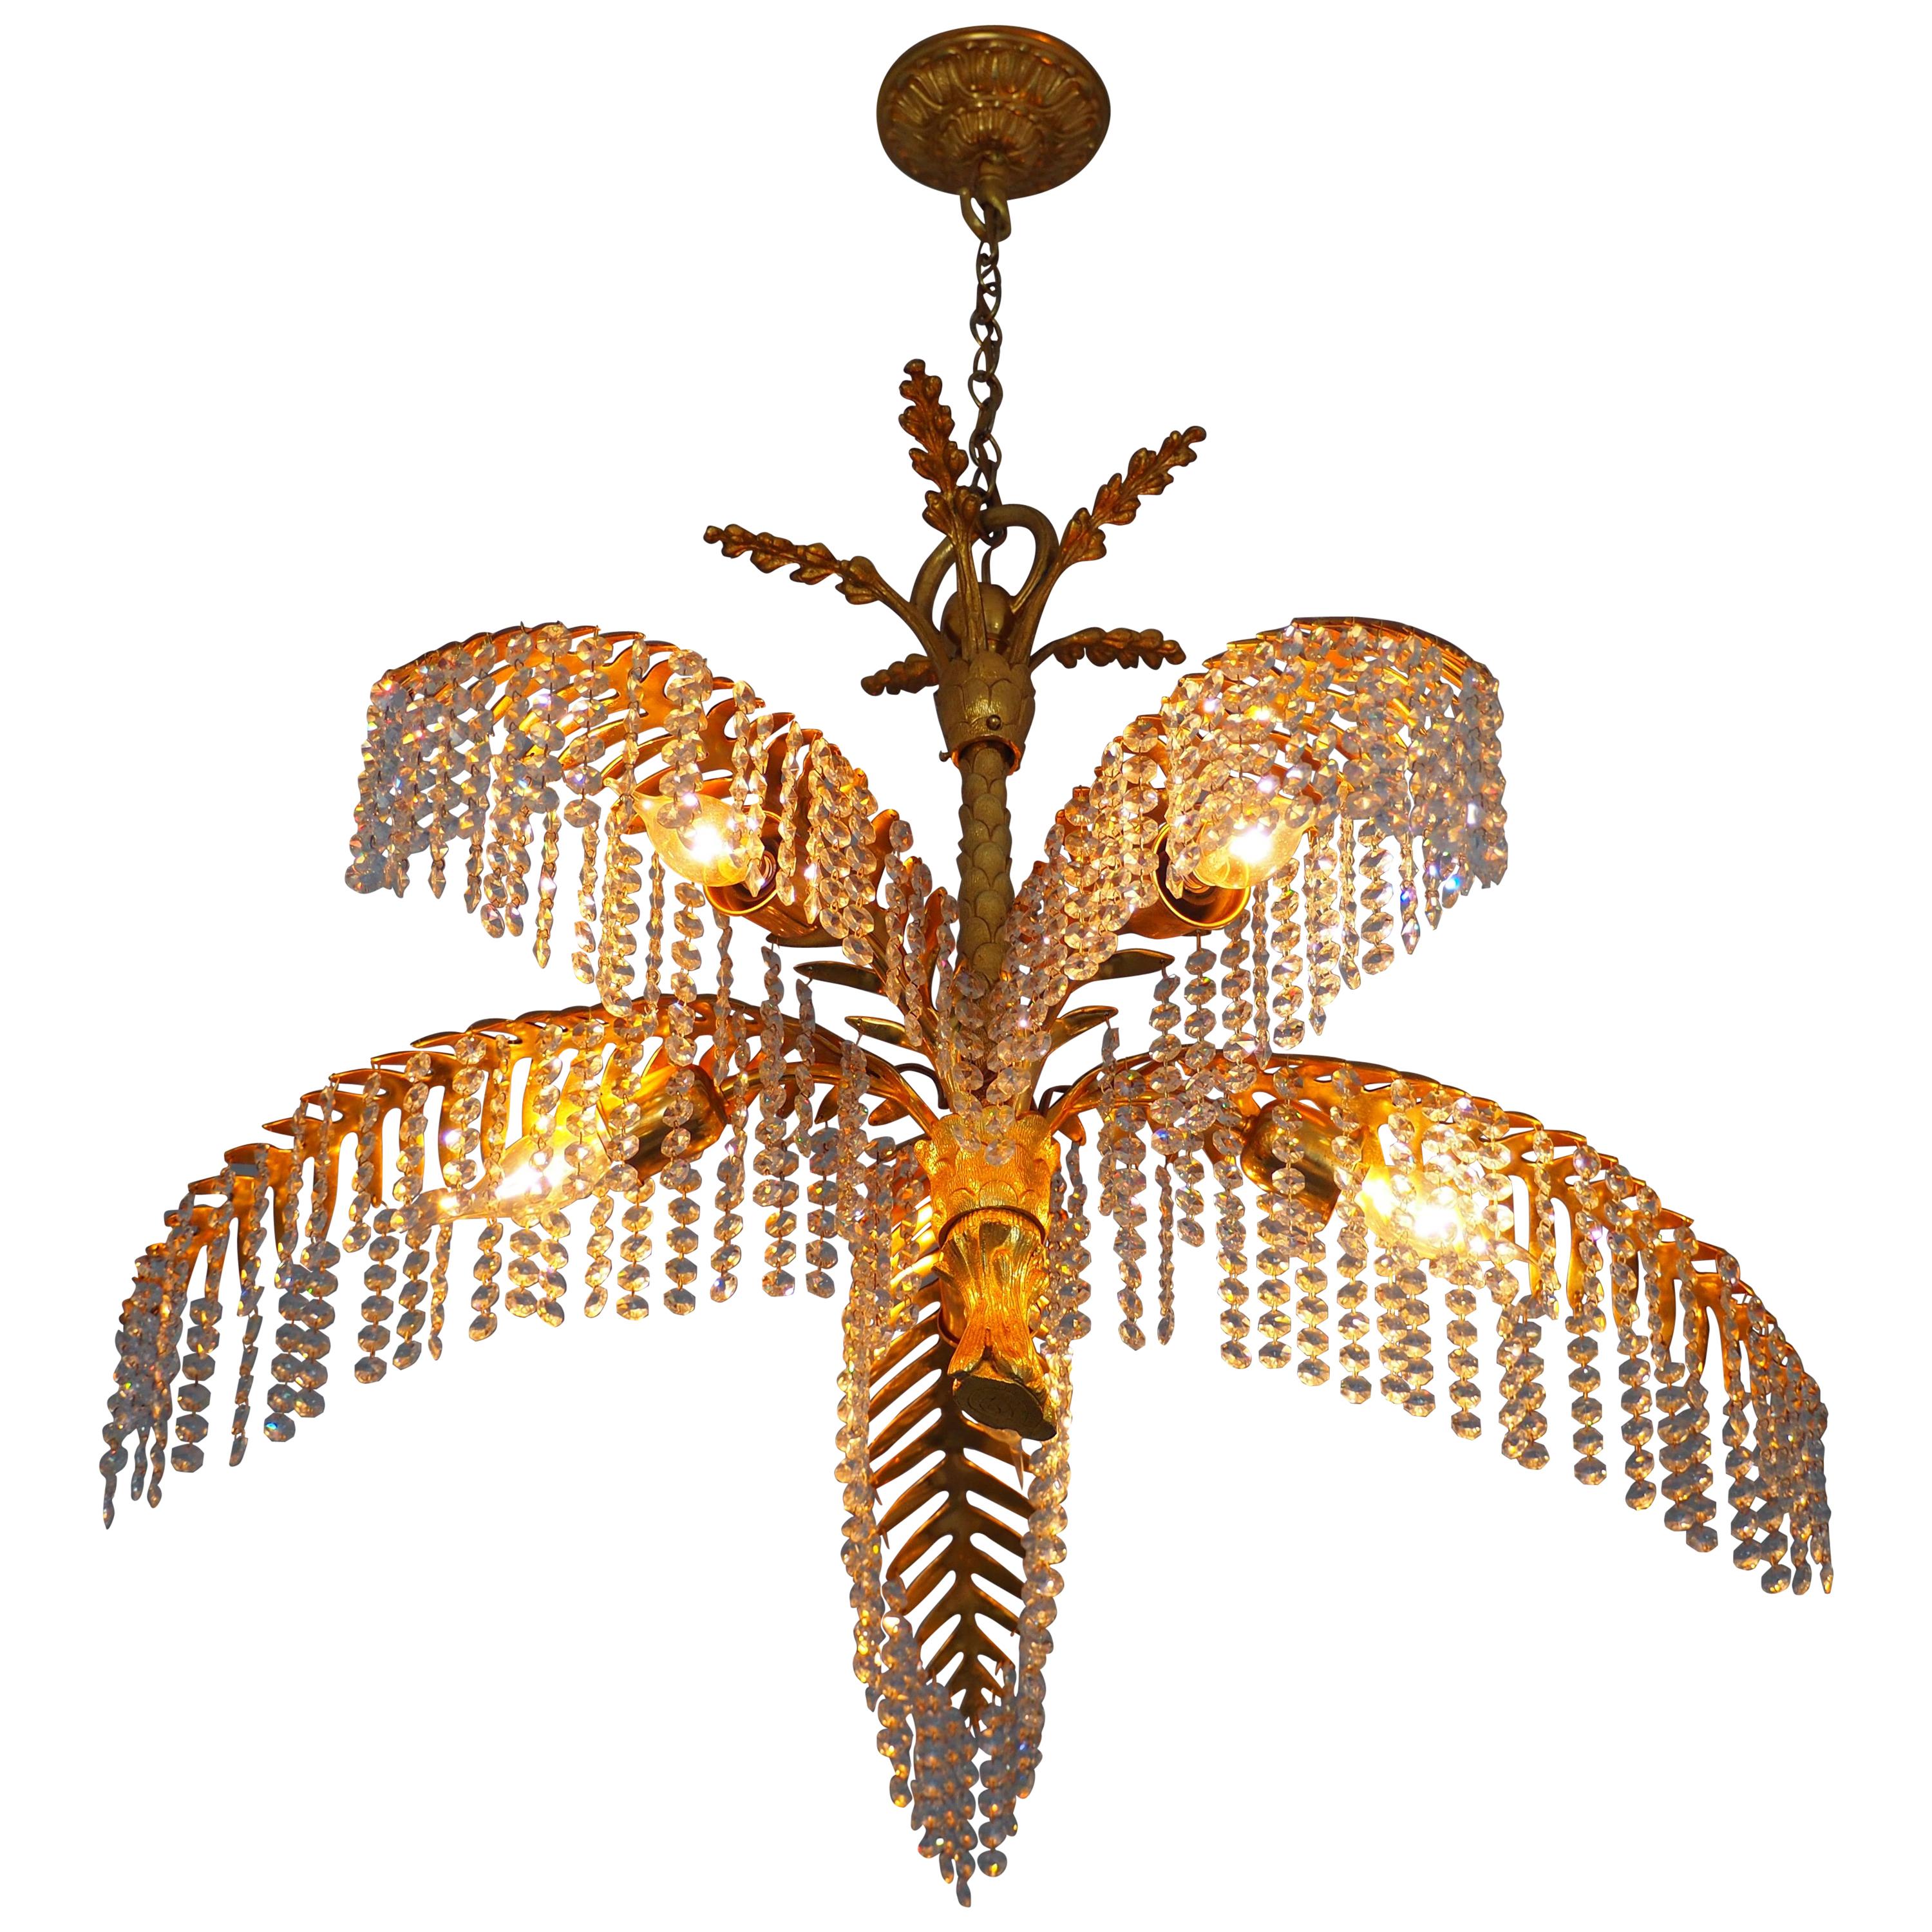 Wonderful and rare 24-carat gold-plated bronze and crystal palm tree chandelier by Bakalowits, Austria, circa 1970s.
This amazing fixture is made of gilt solid bronze frame and cut crystal (Swarovski) in the midcentury
Socket: 5 x e14 (Edison) for